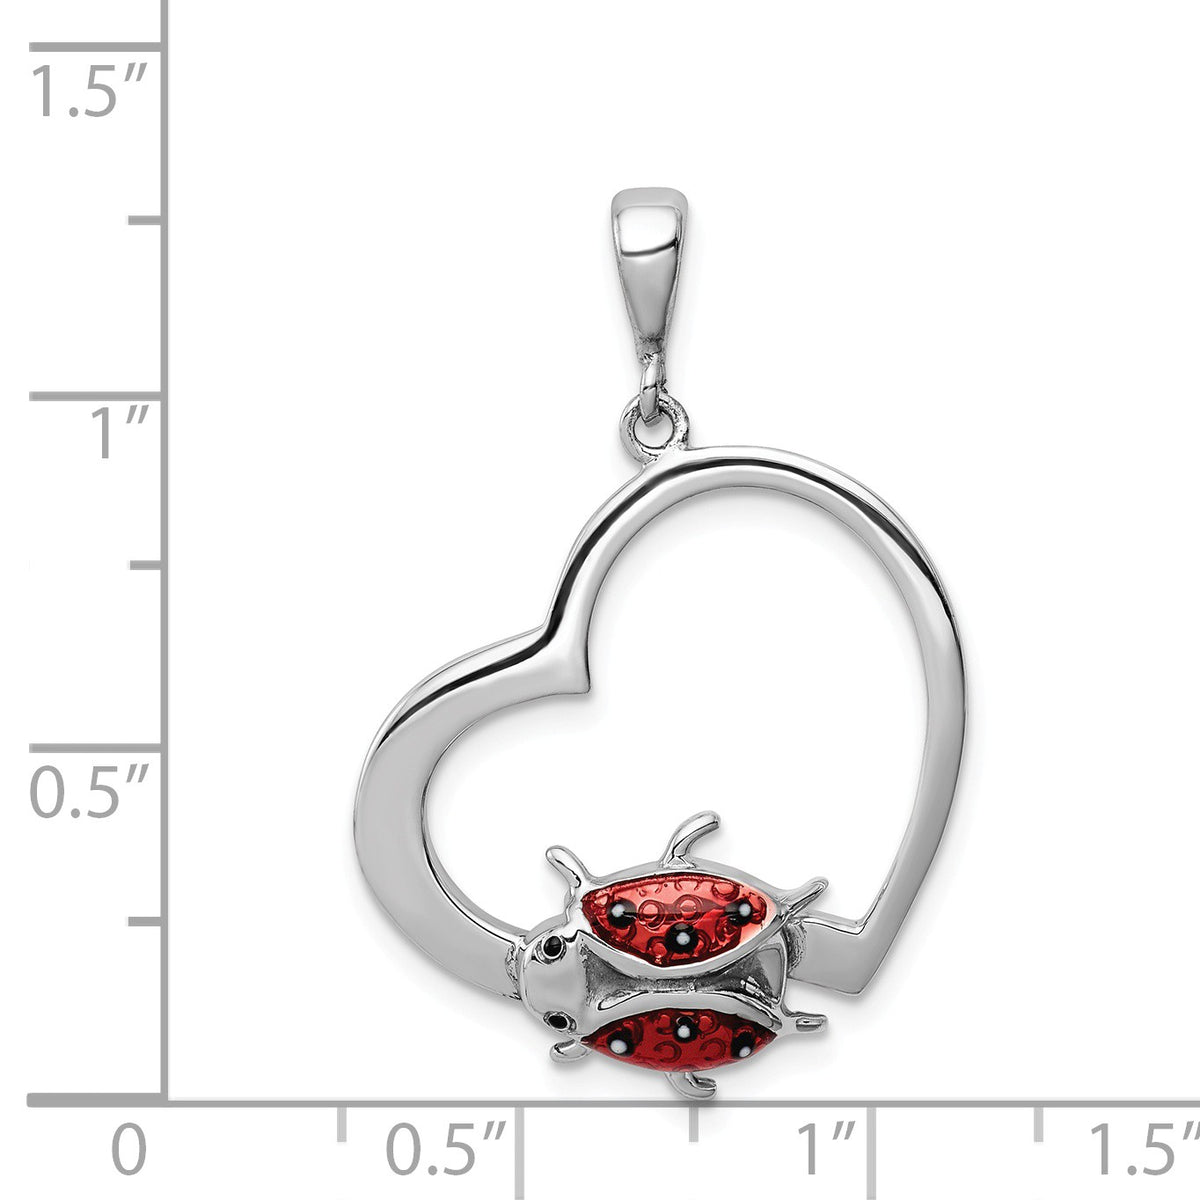 Alternate view of the Sterling Silver and Enameled Open Heart Ladybug Pendant, 22mm by The Black Bow Jewelry Co.